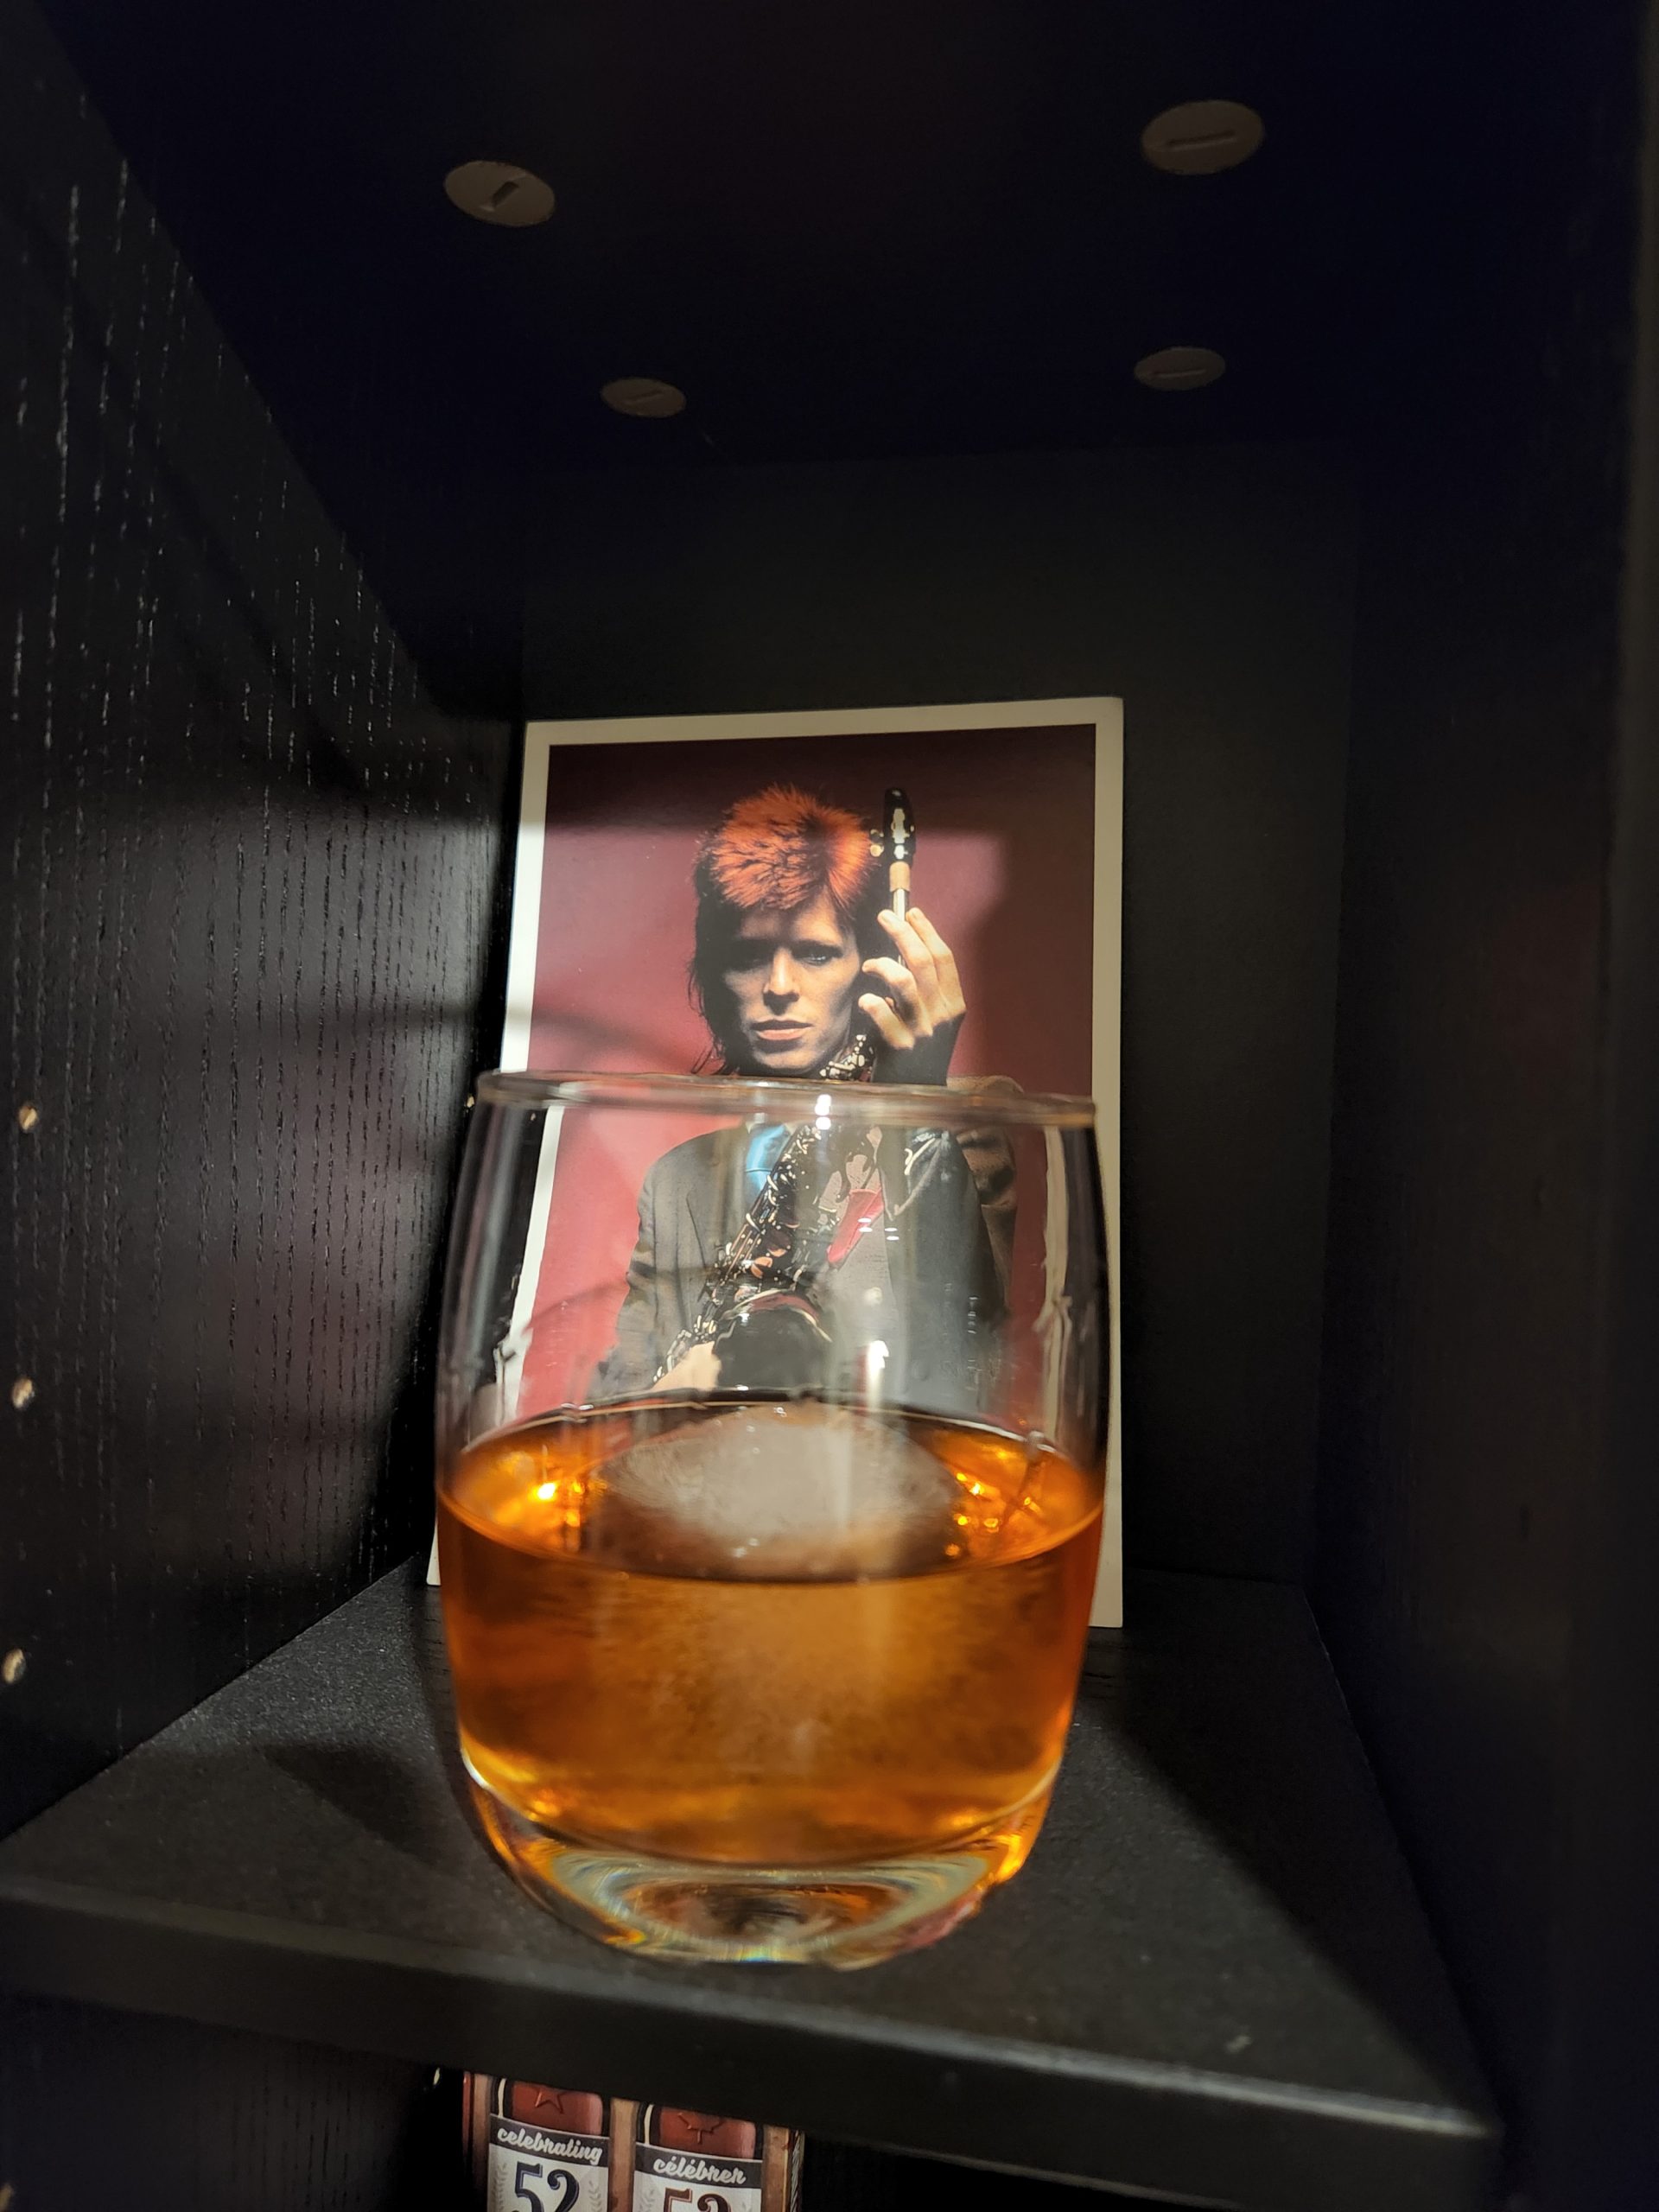 An Oaxaca Old Fashioned cocktail in front of a picture of David Bowie.